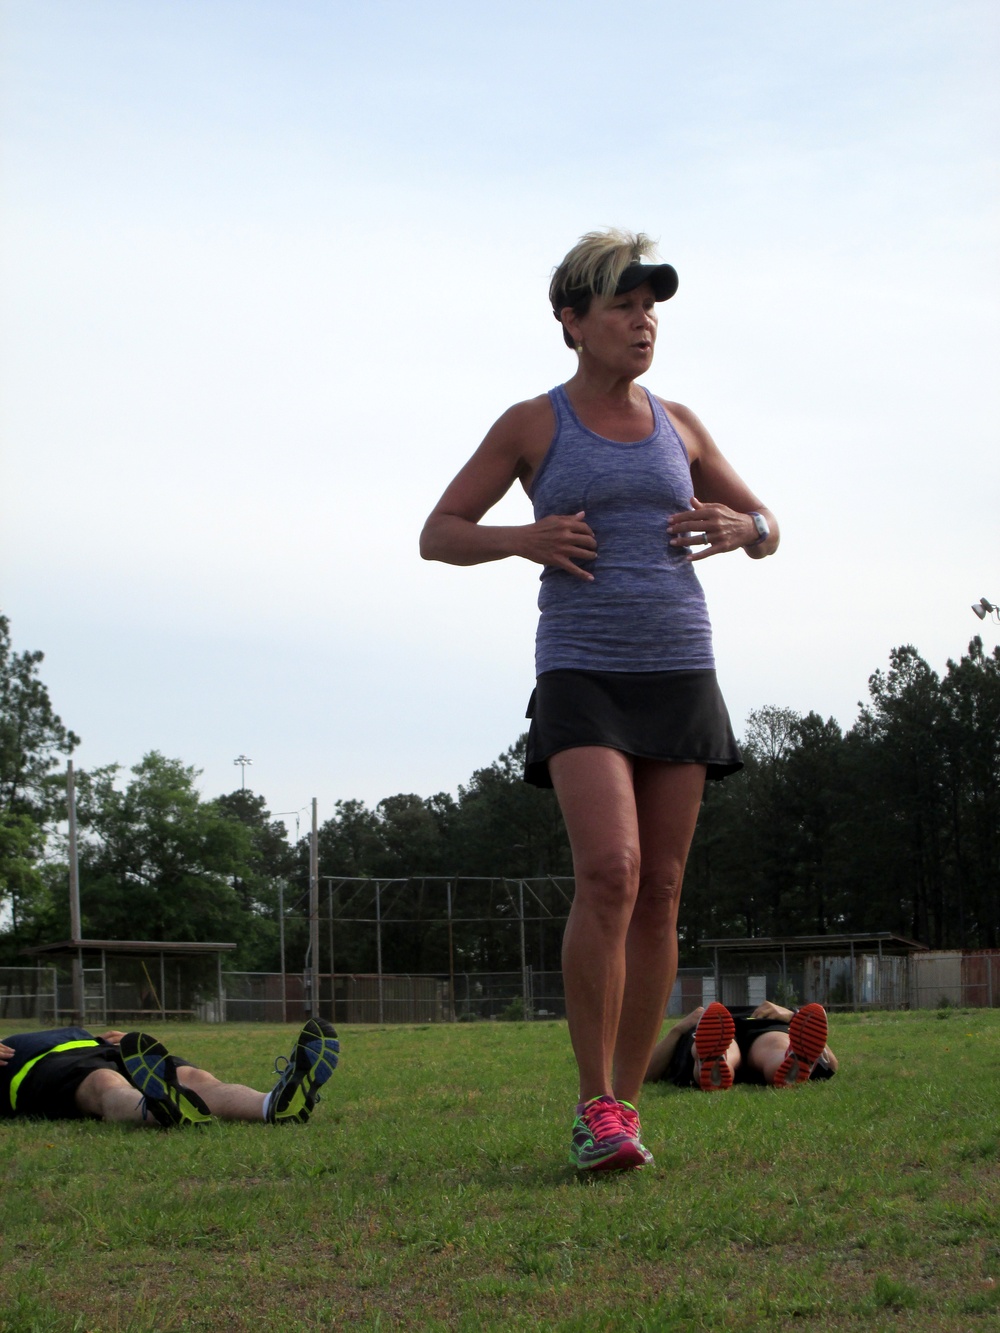 In Step: Fort Bragg Soldiers, civilians learn the benefits of ChiRunning